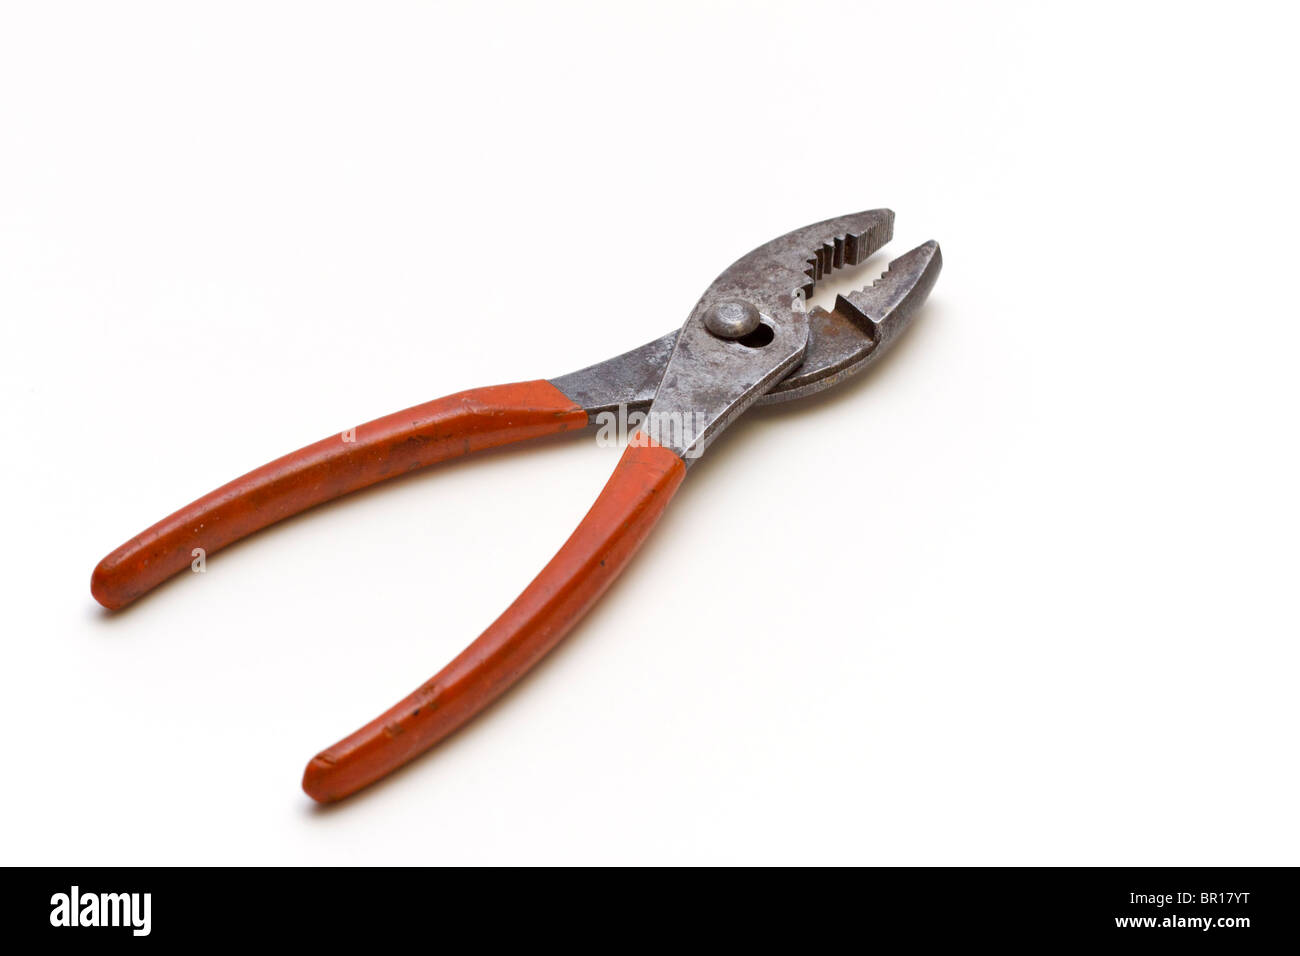 Adjustable pliers with an insulated orange plastic grip Stock Photo